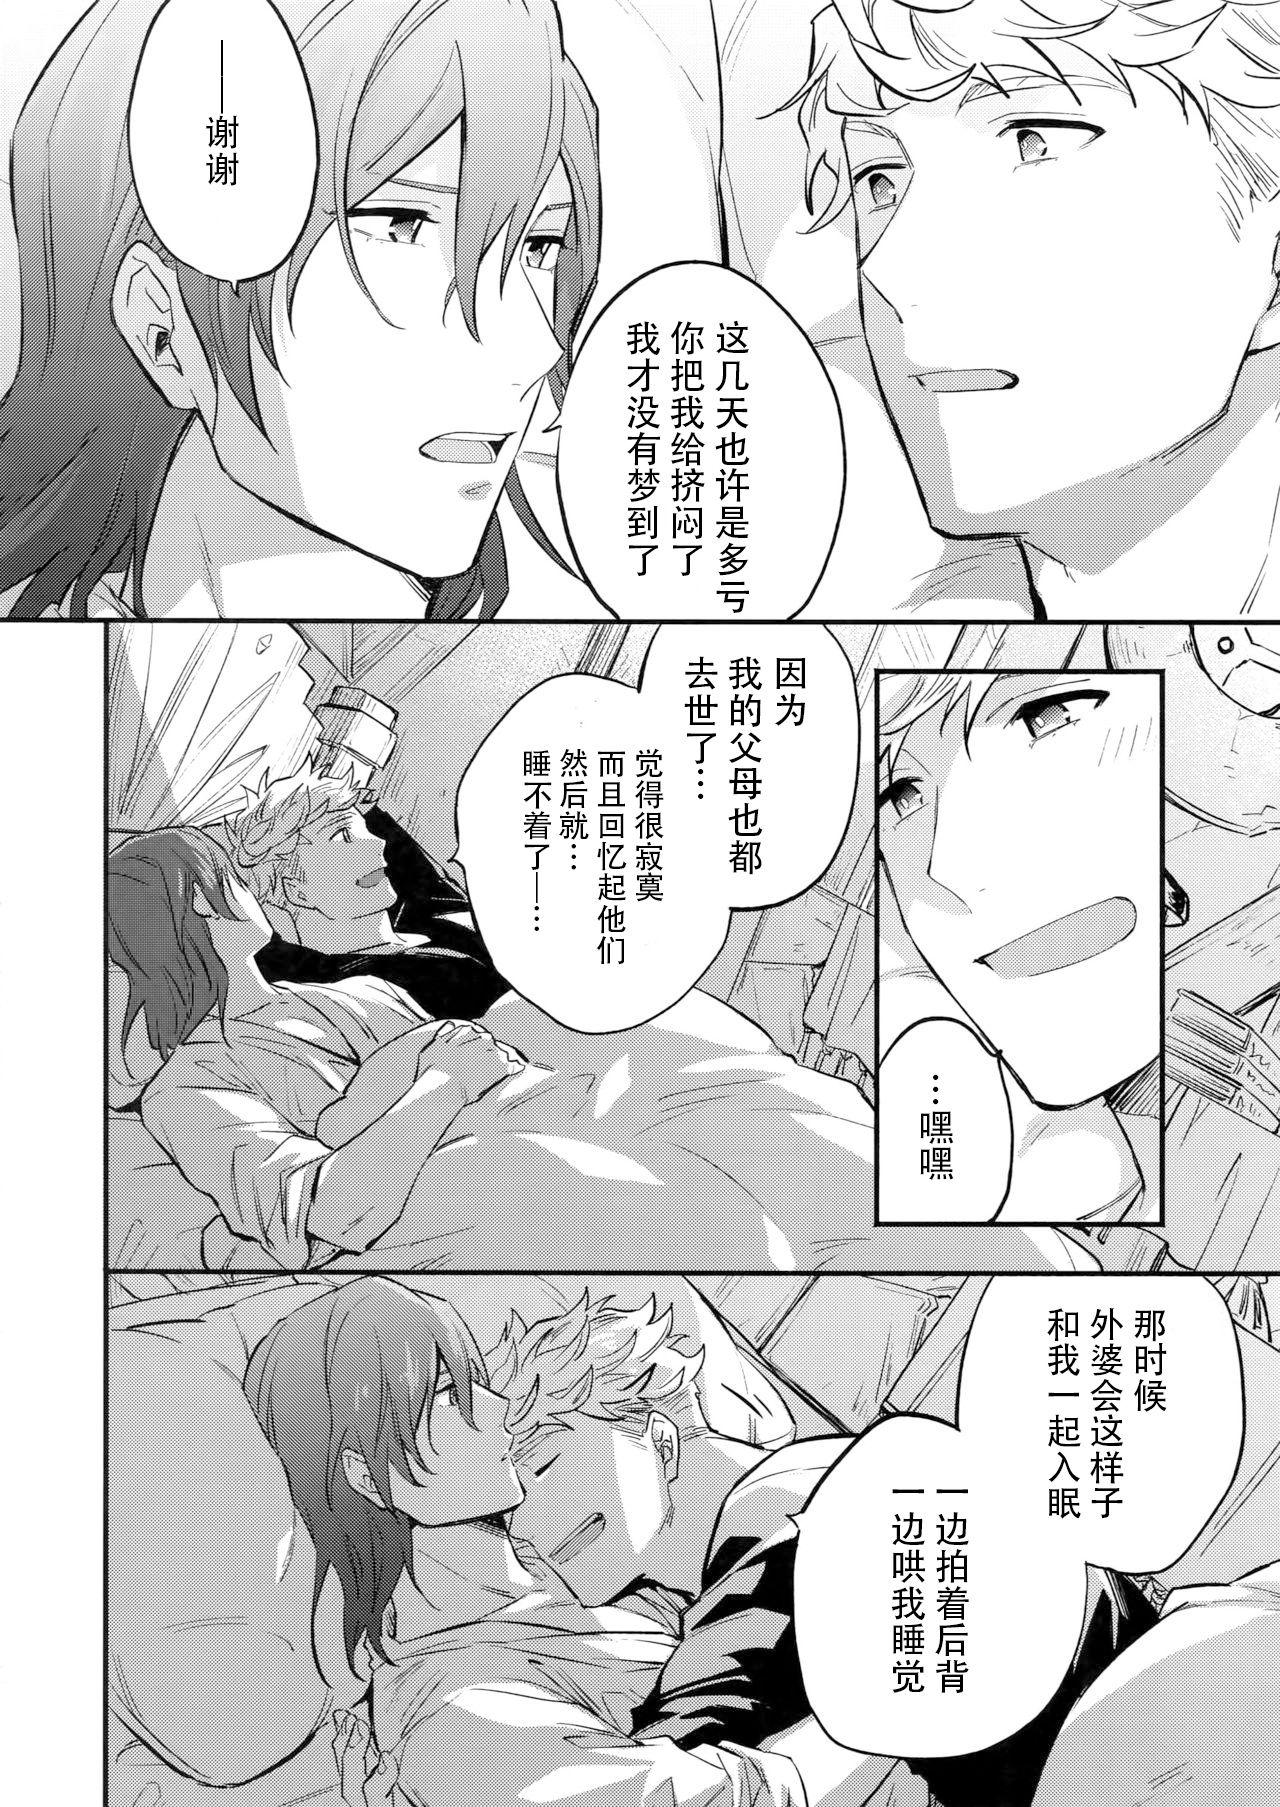 Tongue in the bed - Granblue fantasy Asshole - Page 14